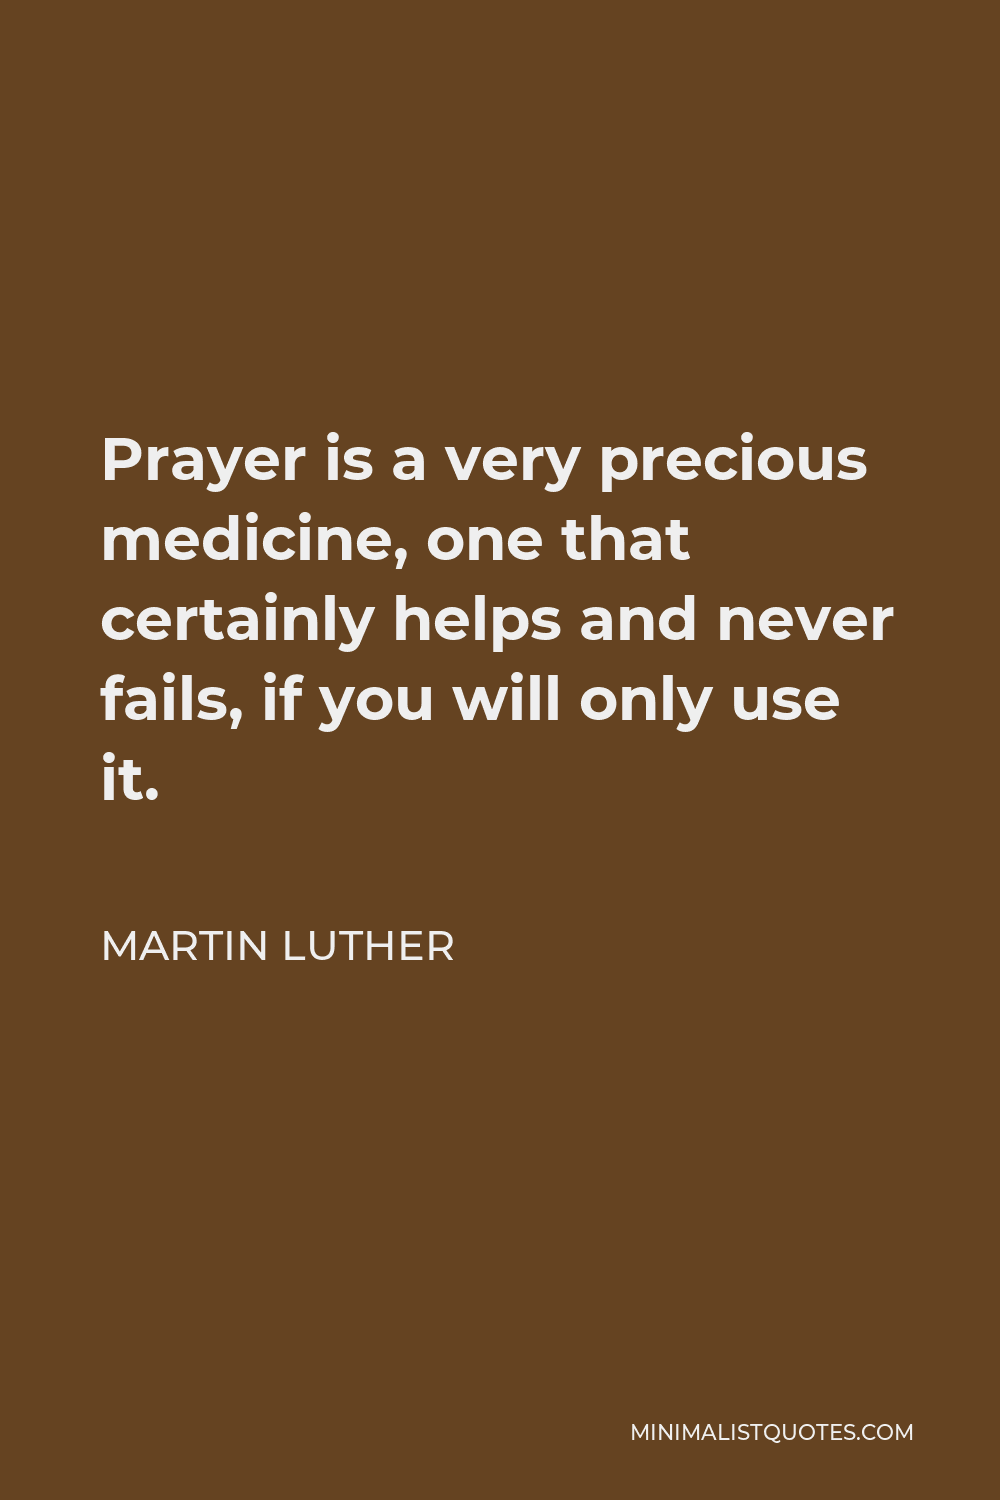 Martin Luther Quote - Prayer is a very precious medicine, one that certainly helps and never fails, if you will only use it.